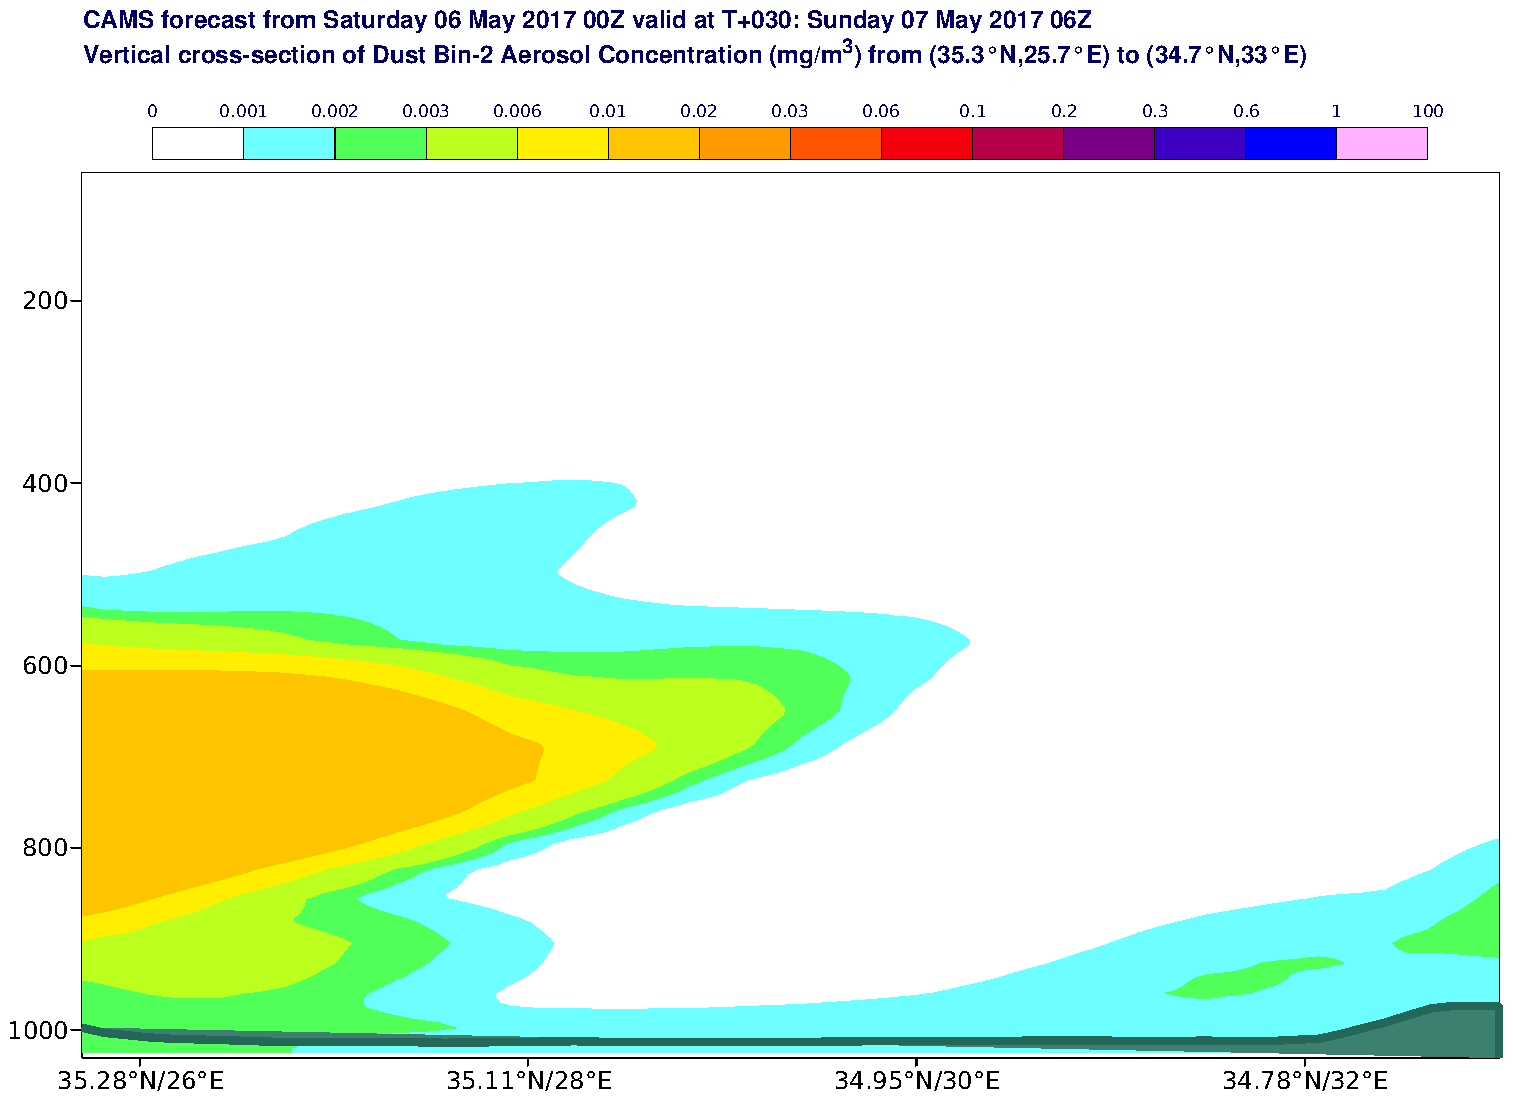 Vertical cross-section of Dust Bin-2 Aerosol Concentration (mg/m3) valid at T30 - 2017-05-07 06:00